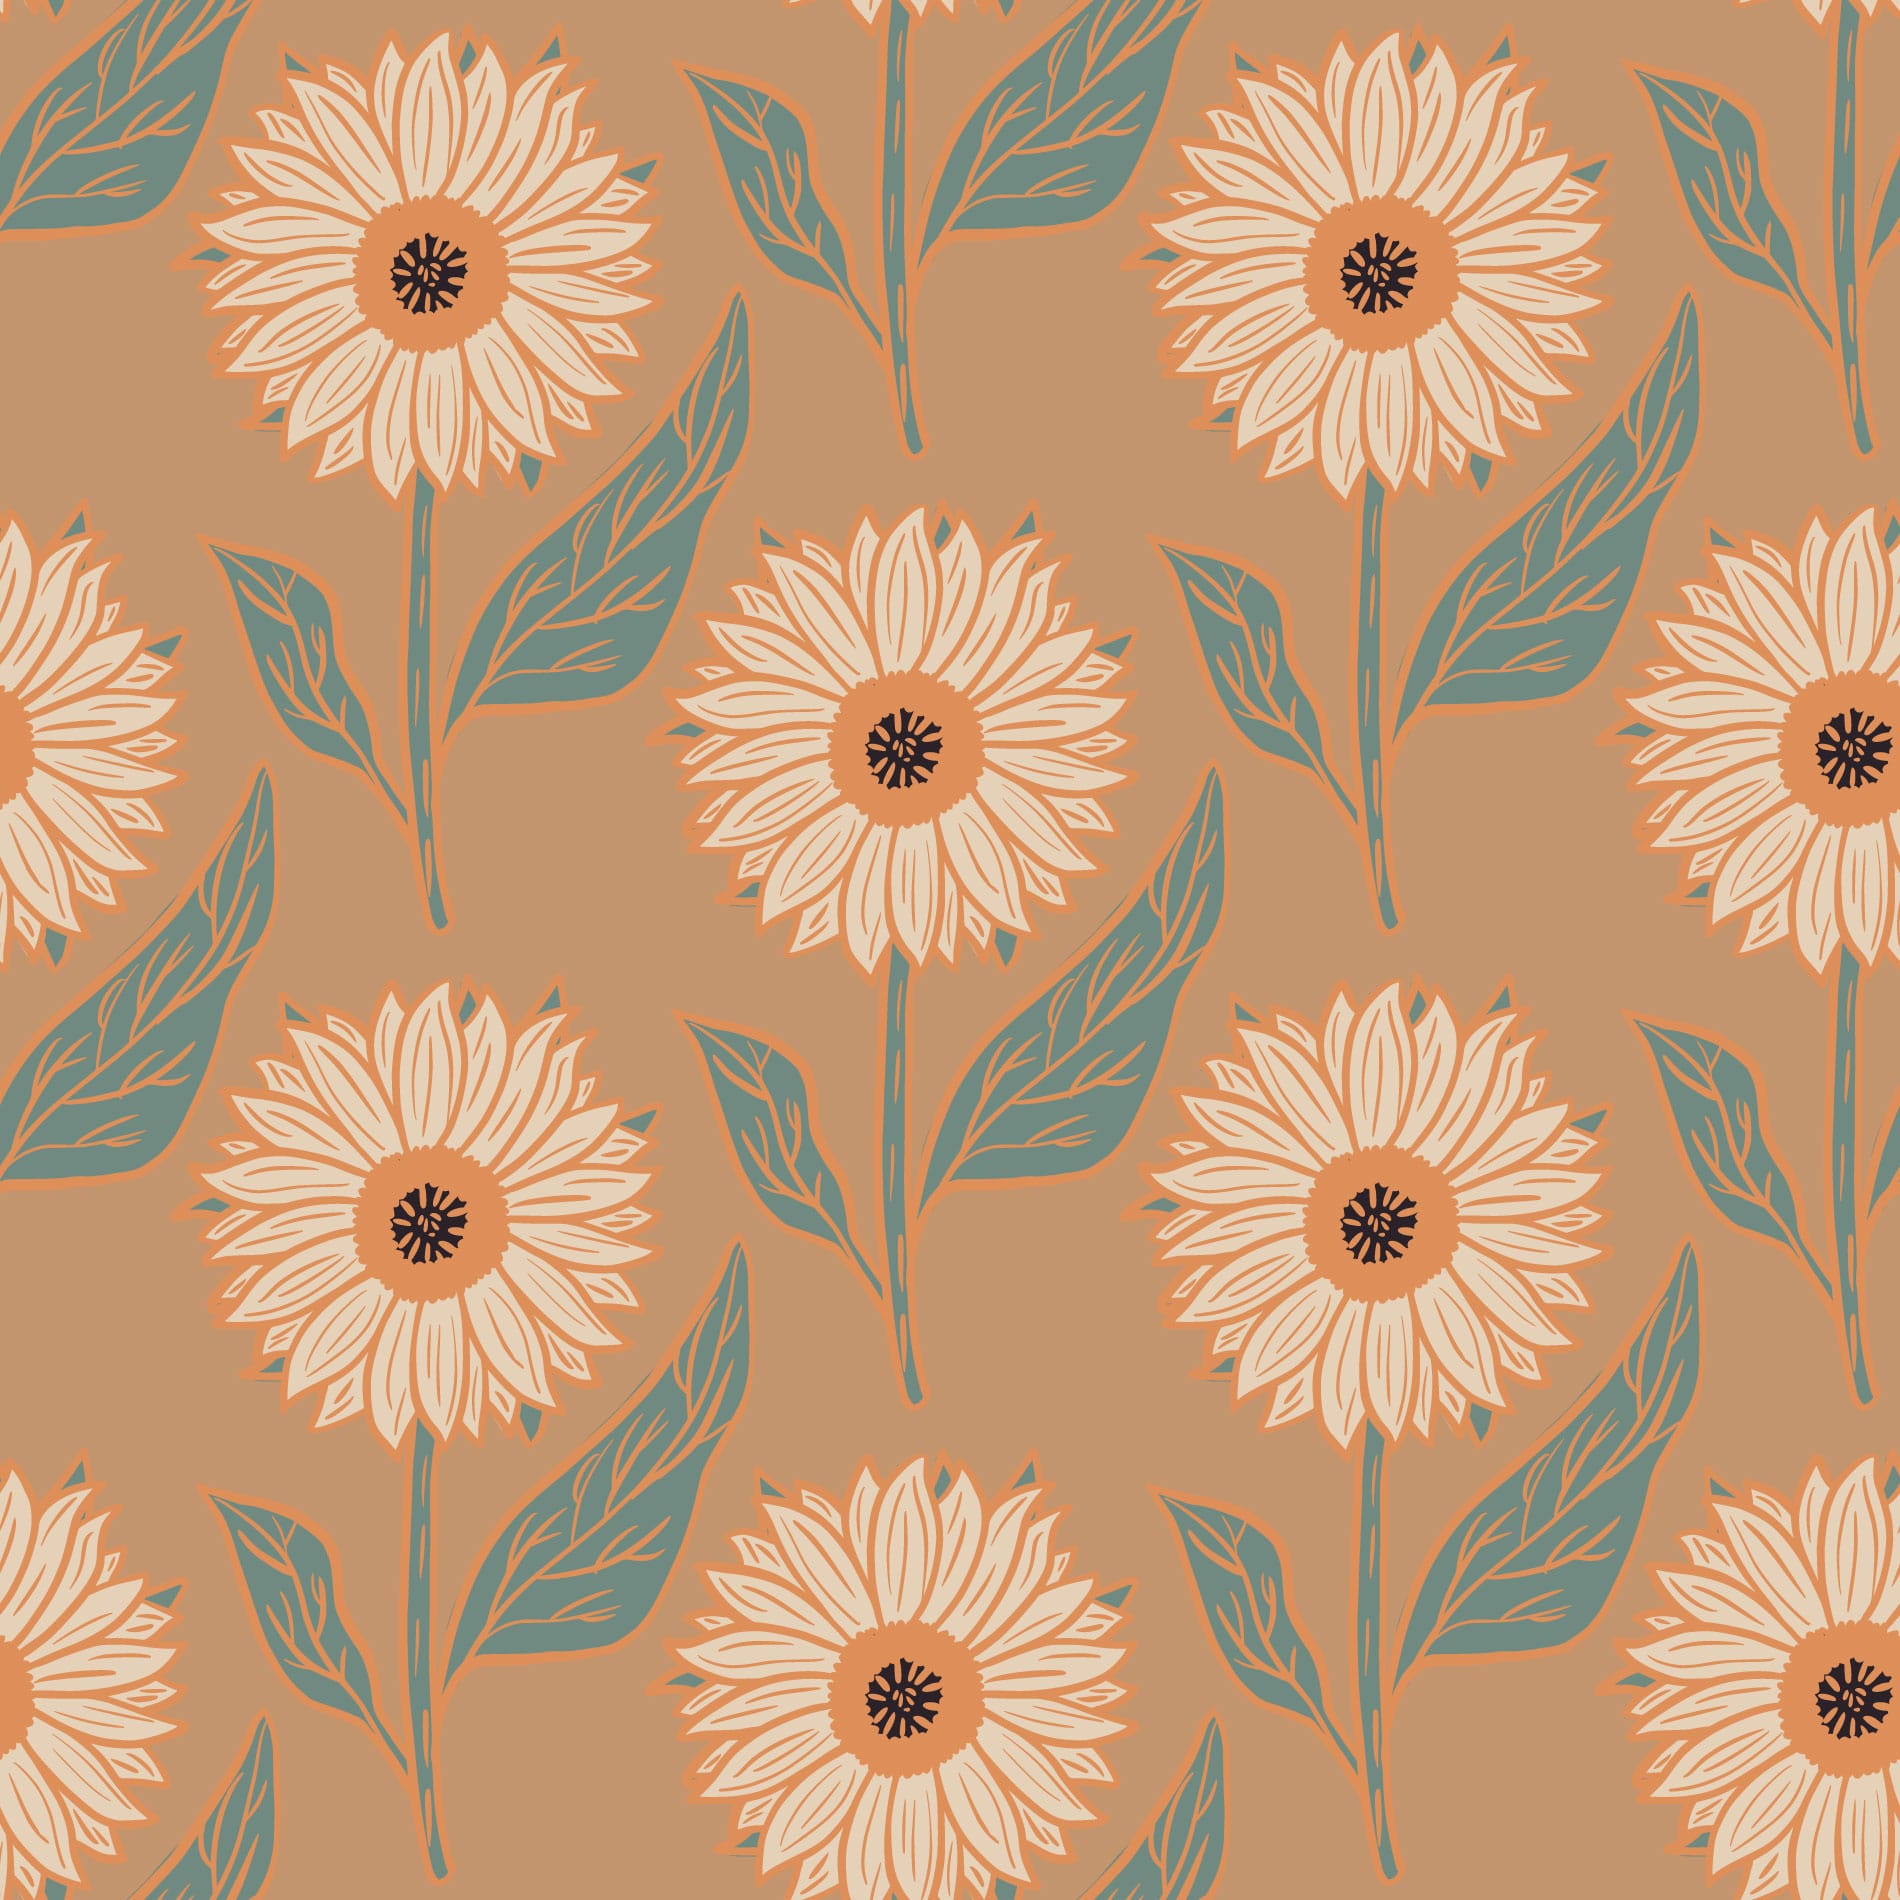 Aesthetic sunflower wallpaper - Peel and Stick or Non-Pasted